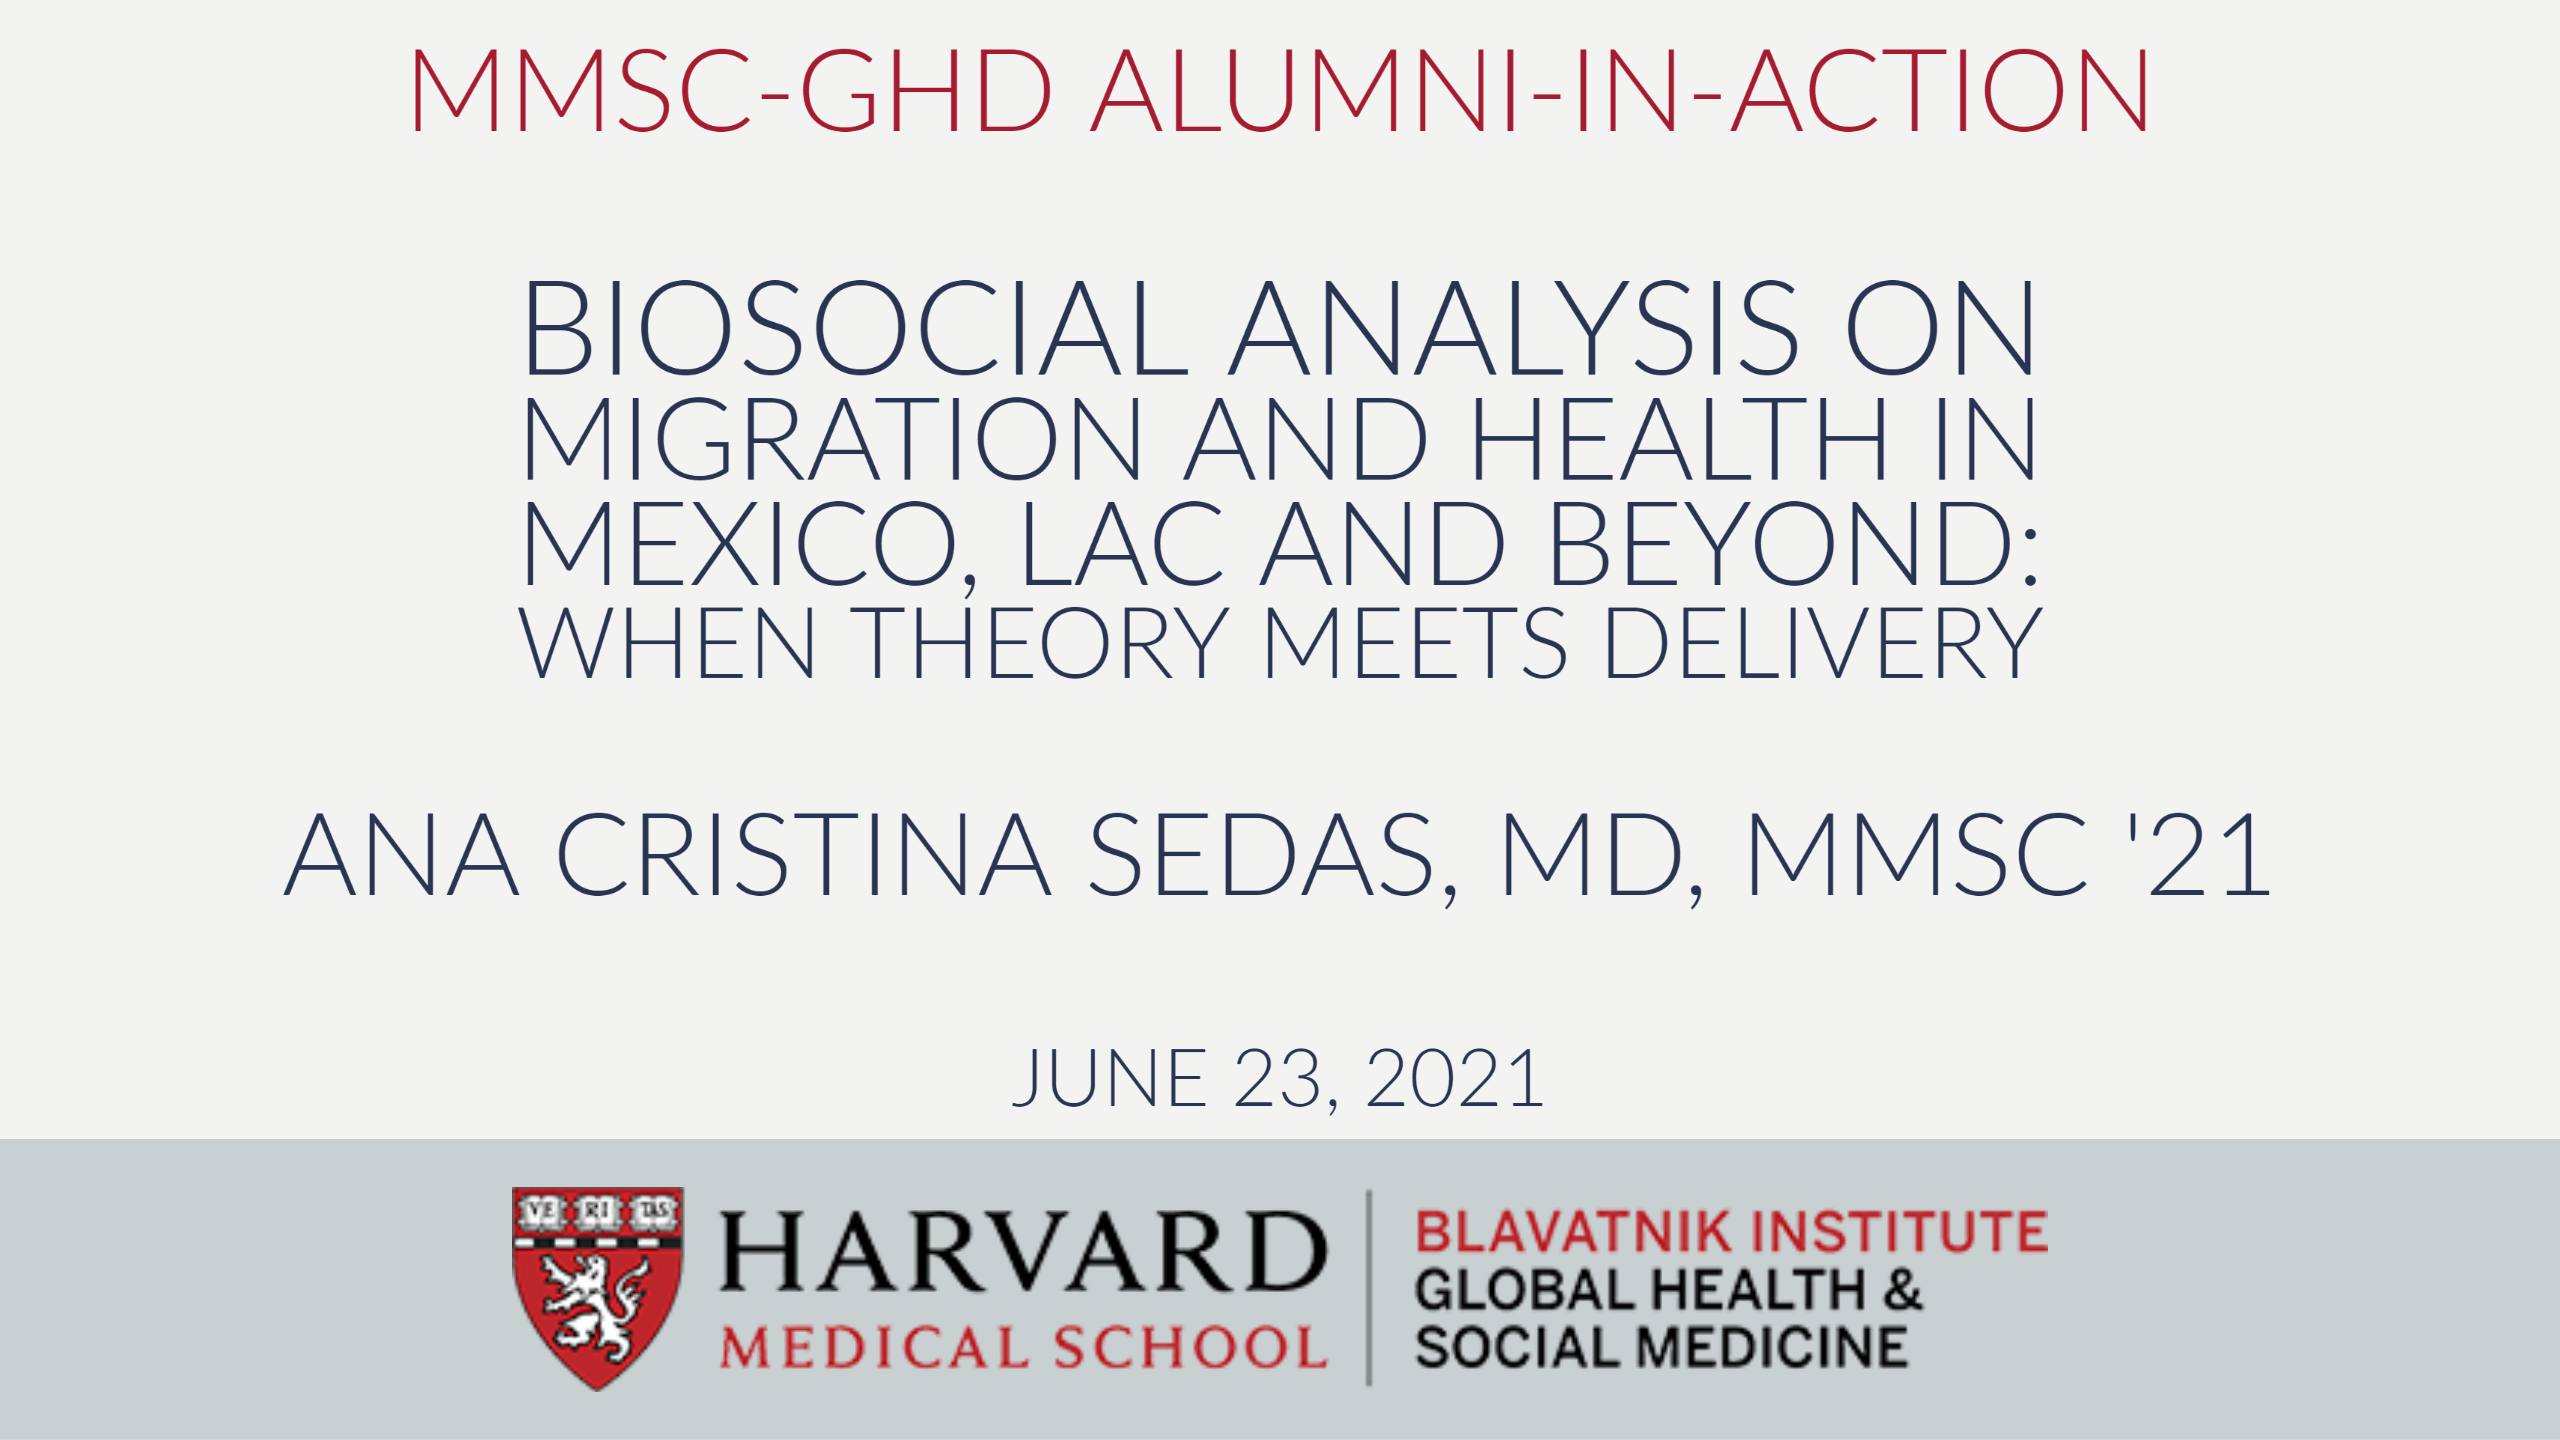 Biosocial Analysis on Migration and Health in Mexico, LAC and Beyond: When theory meets delivery